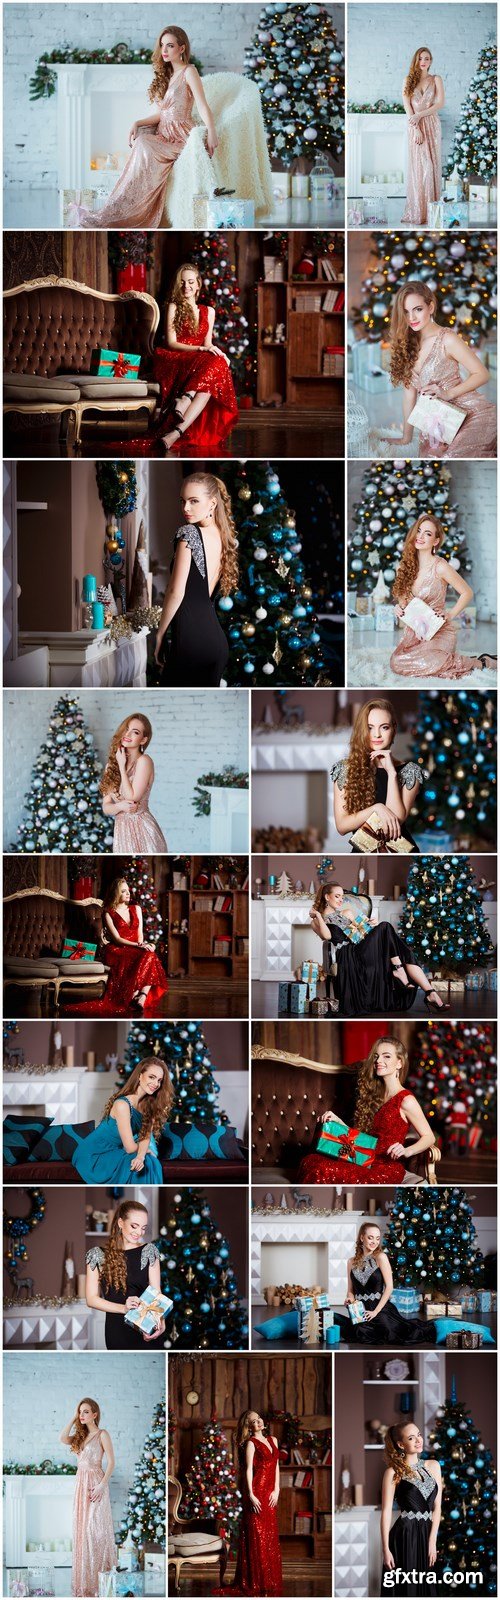 Young woman in elegant dress over christmas interior background 2 - 17xUHQ JPEG